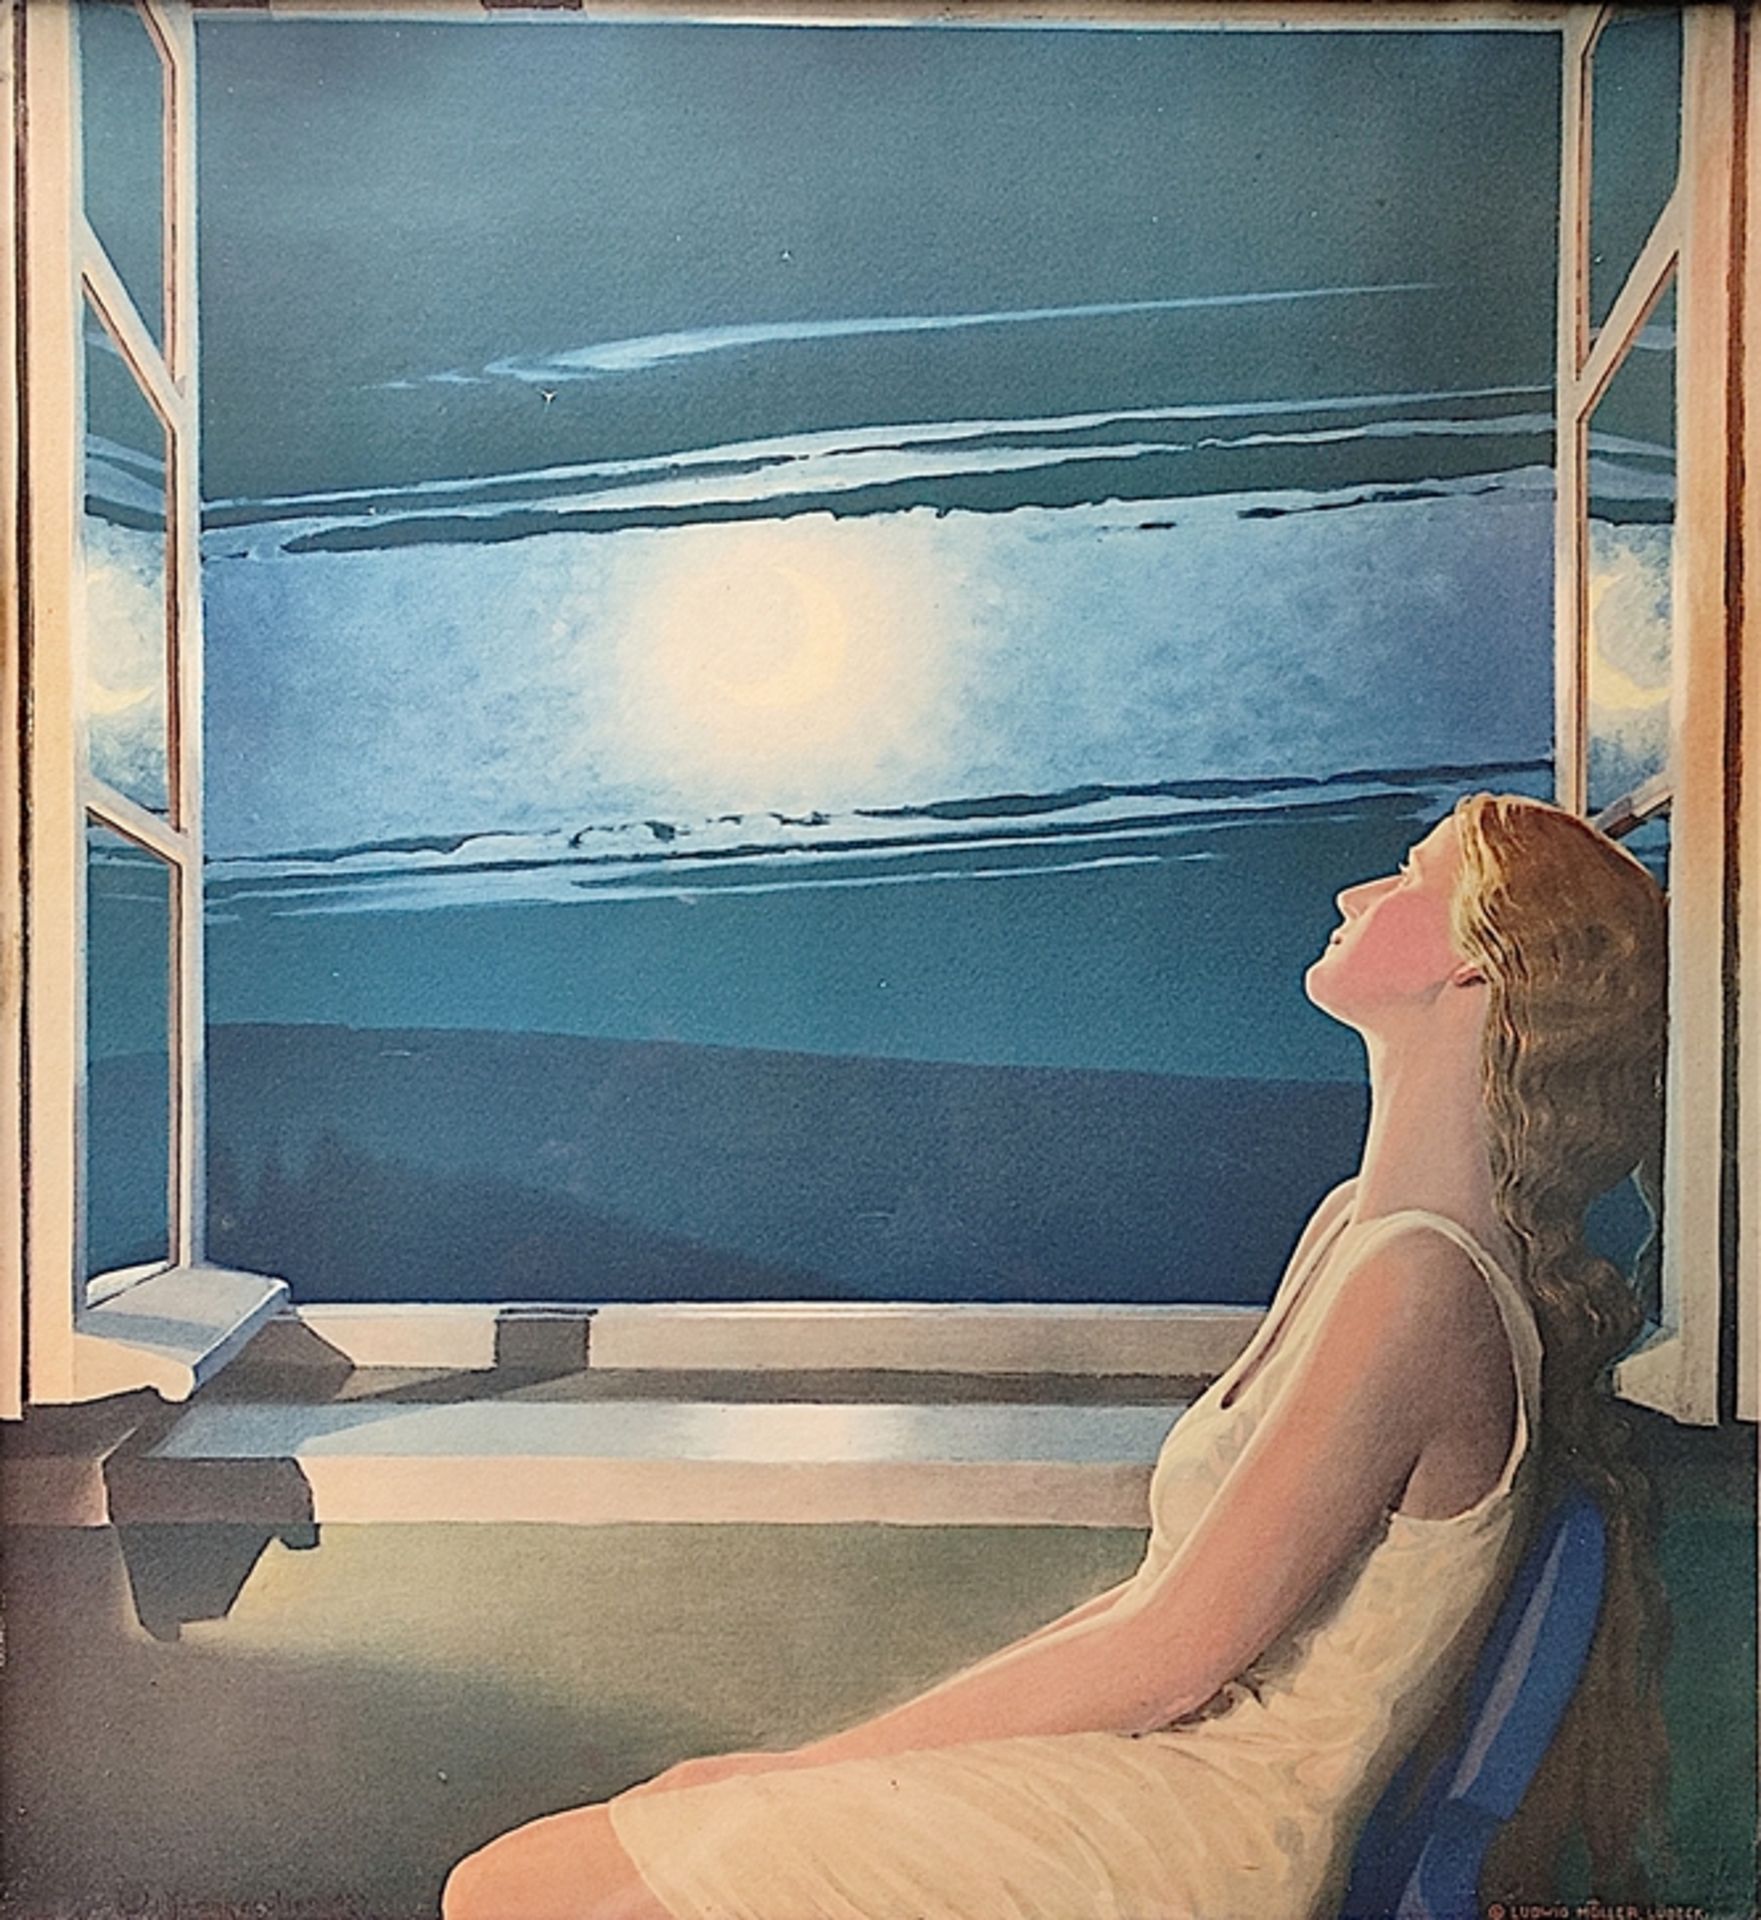 Müller, Wolfgang (20th century) "Woman at the window", color lithograph, signed on the left in the 